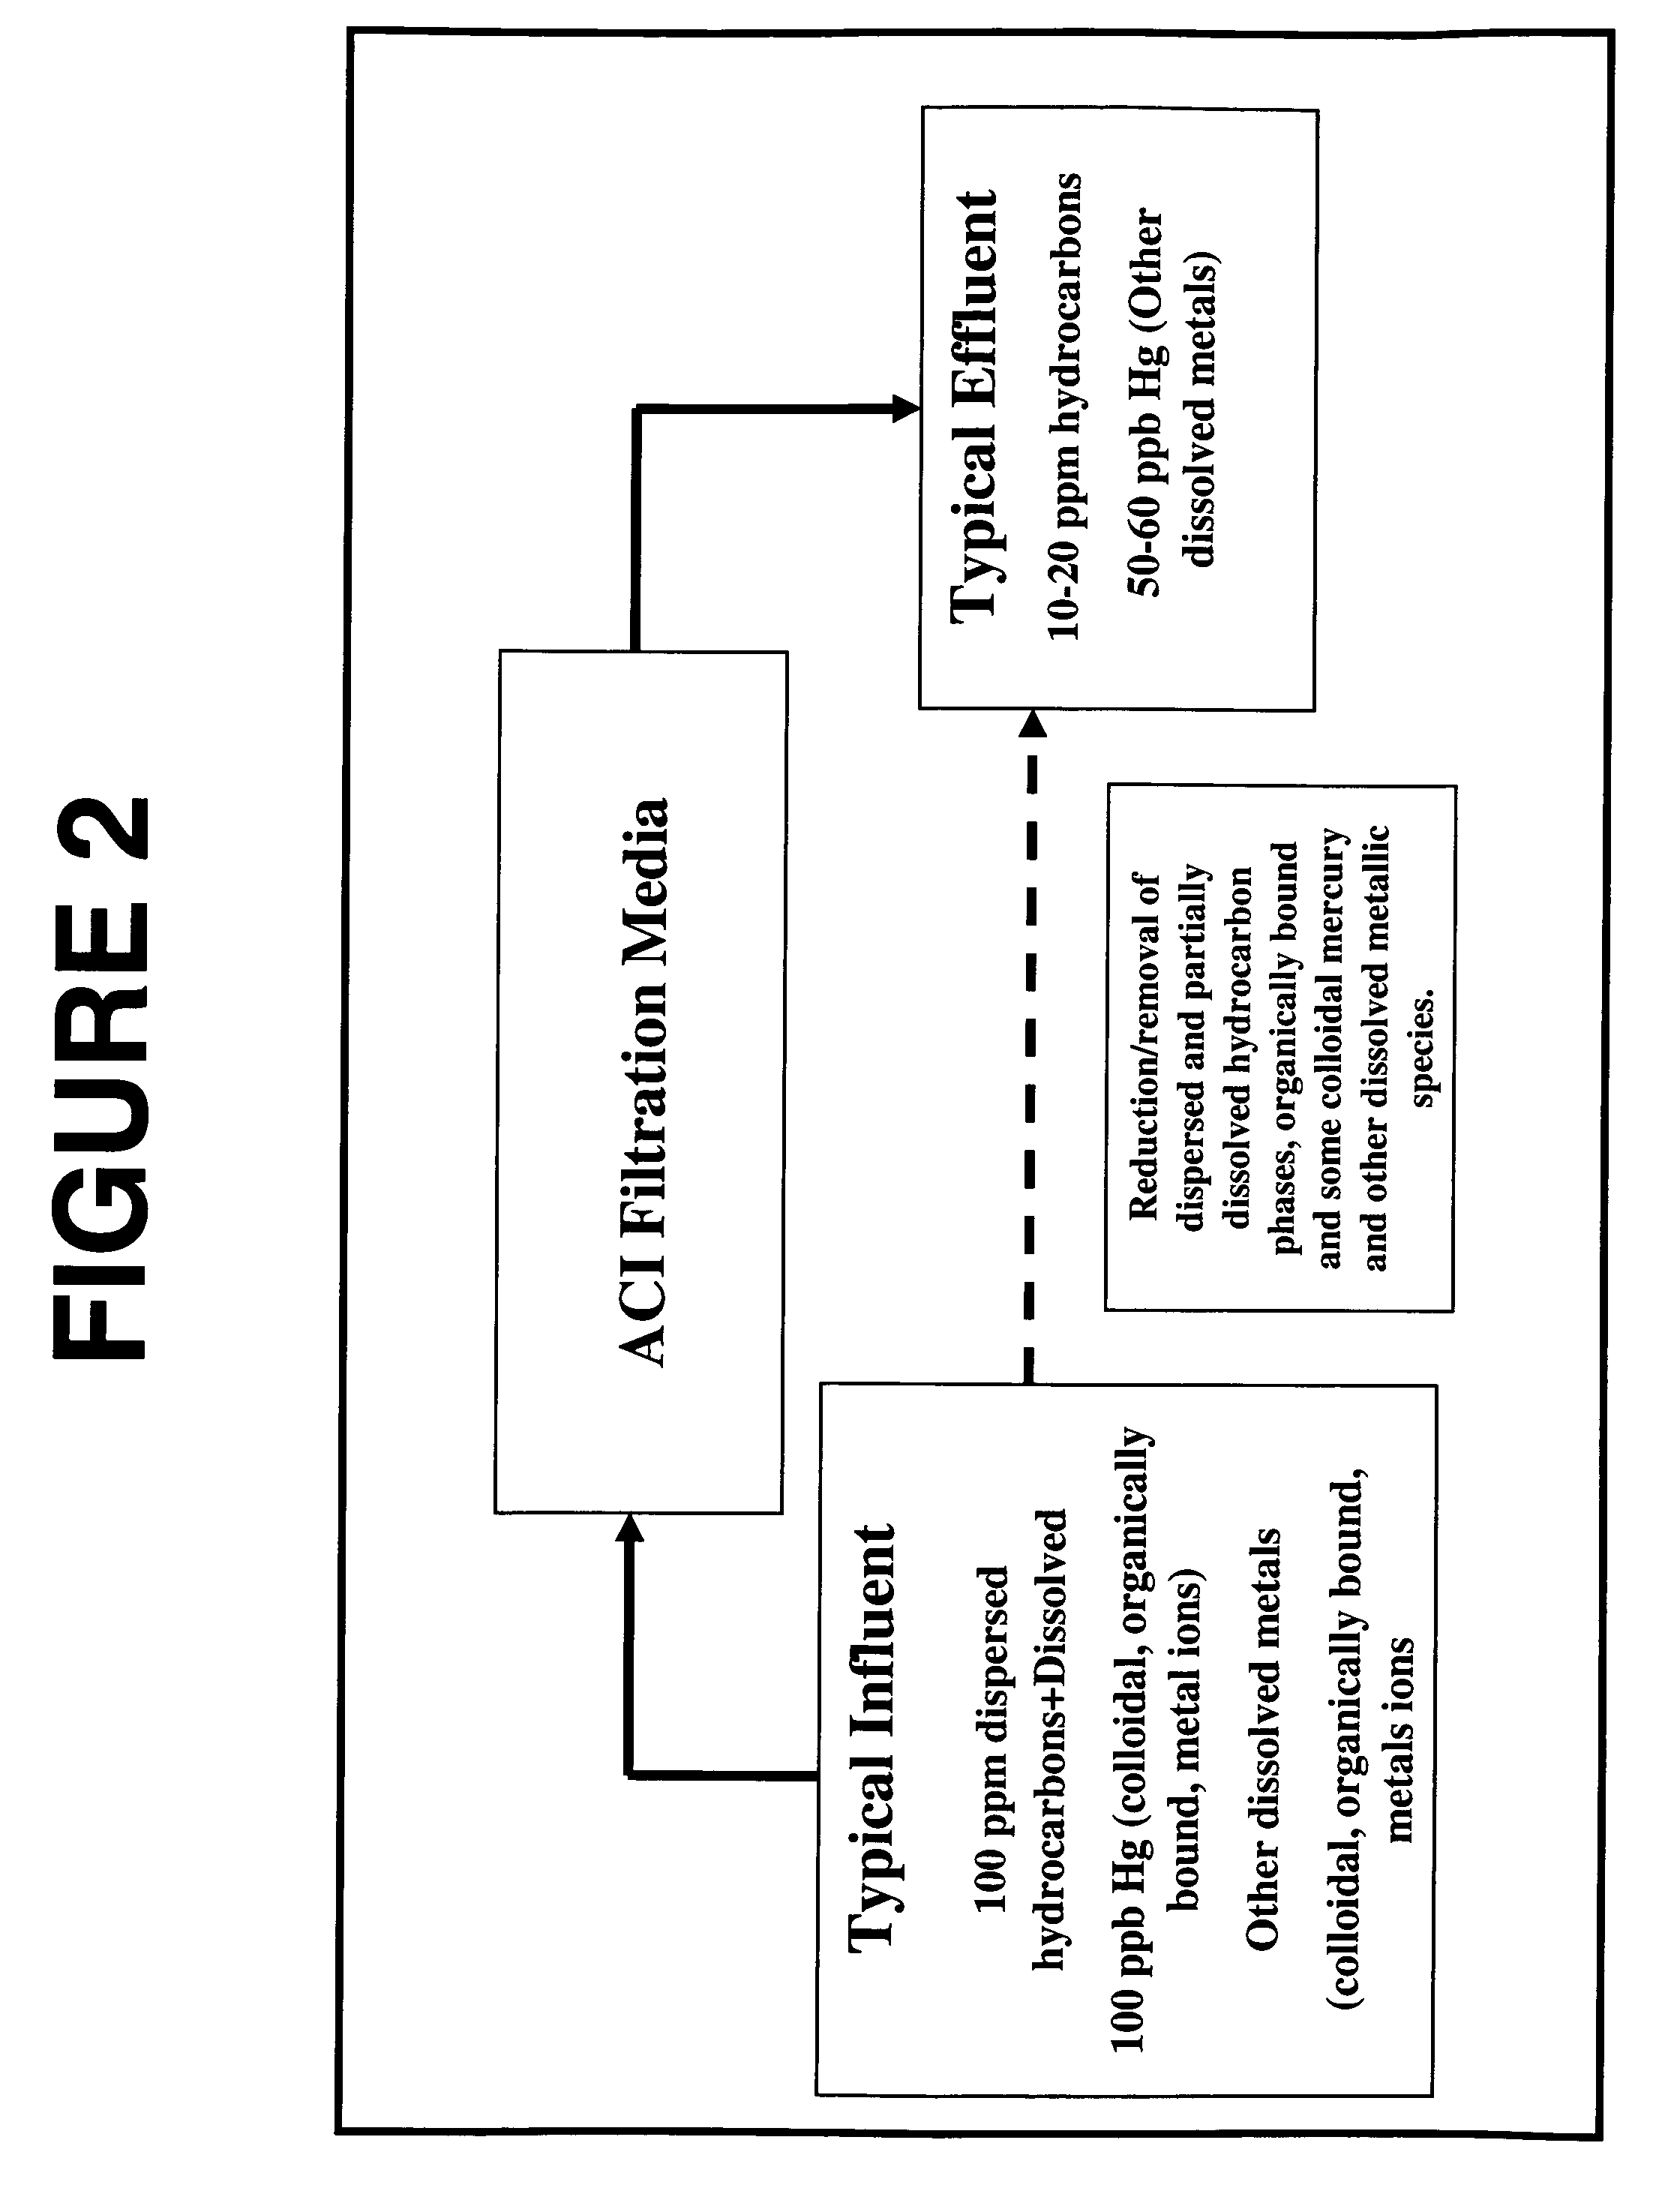 Process for removal of contaminants from industrial streams